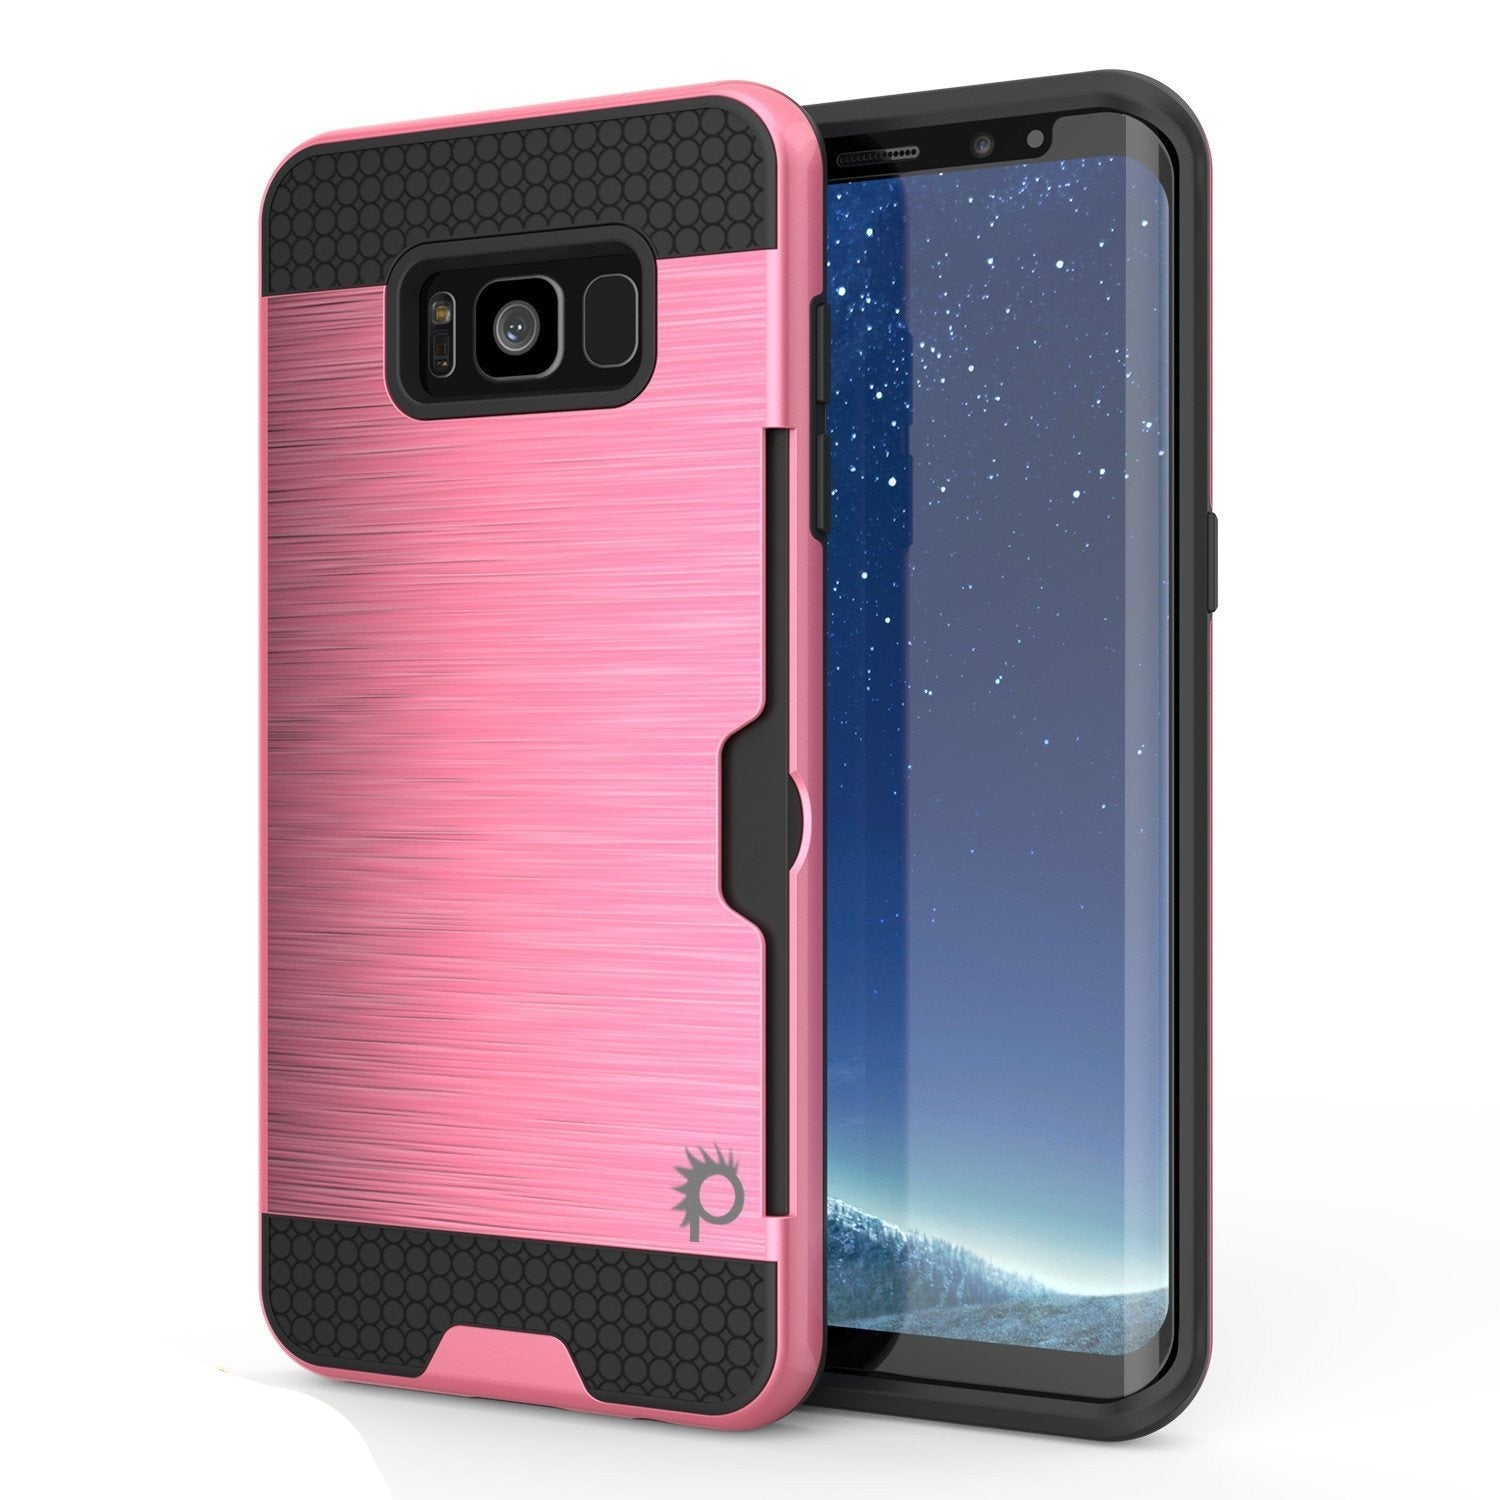 Galaxy S8 Case, PUNKcase [SLOT Series] [Slim Fit] Dual-Layer Armor Cover w/Integrated Anti-Shock System, Credit Card Slot & PUNKSHIELD Screen Protector for Samsung Galaxy S8 [Pink]